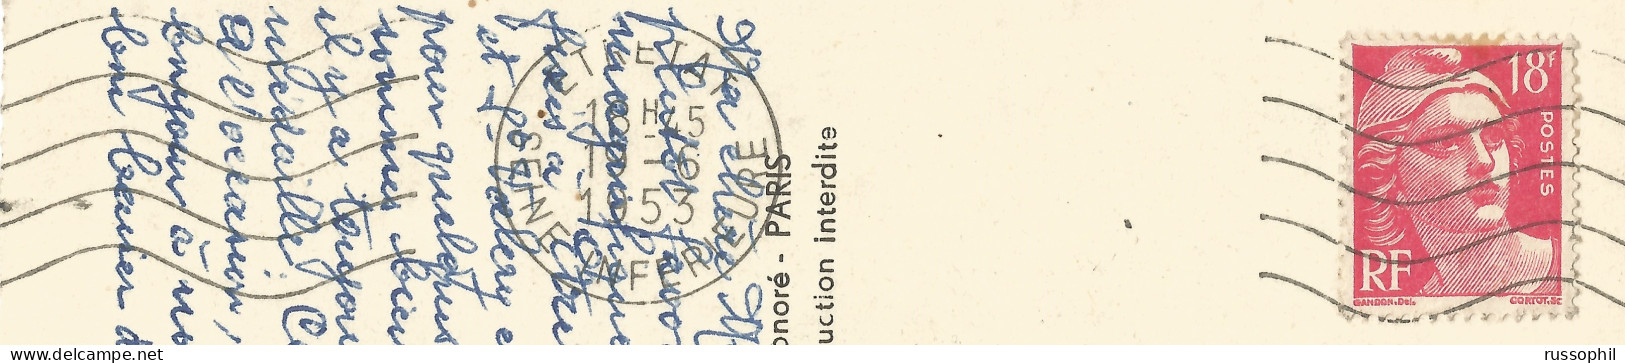 FRANCE - VARIETY &  CURIOSITY - 76 - DISCONTINUED MUTE SECAP DEPARTURE PMK  "ETRETAT" ON FRANKED PC TO BELGIUM - 1953 - Covers & Documents